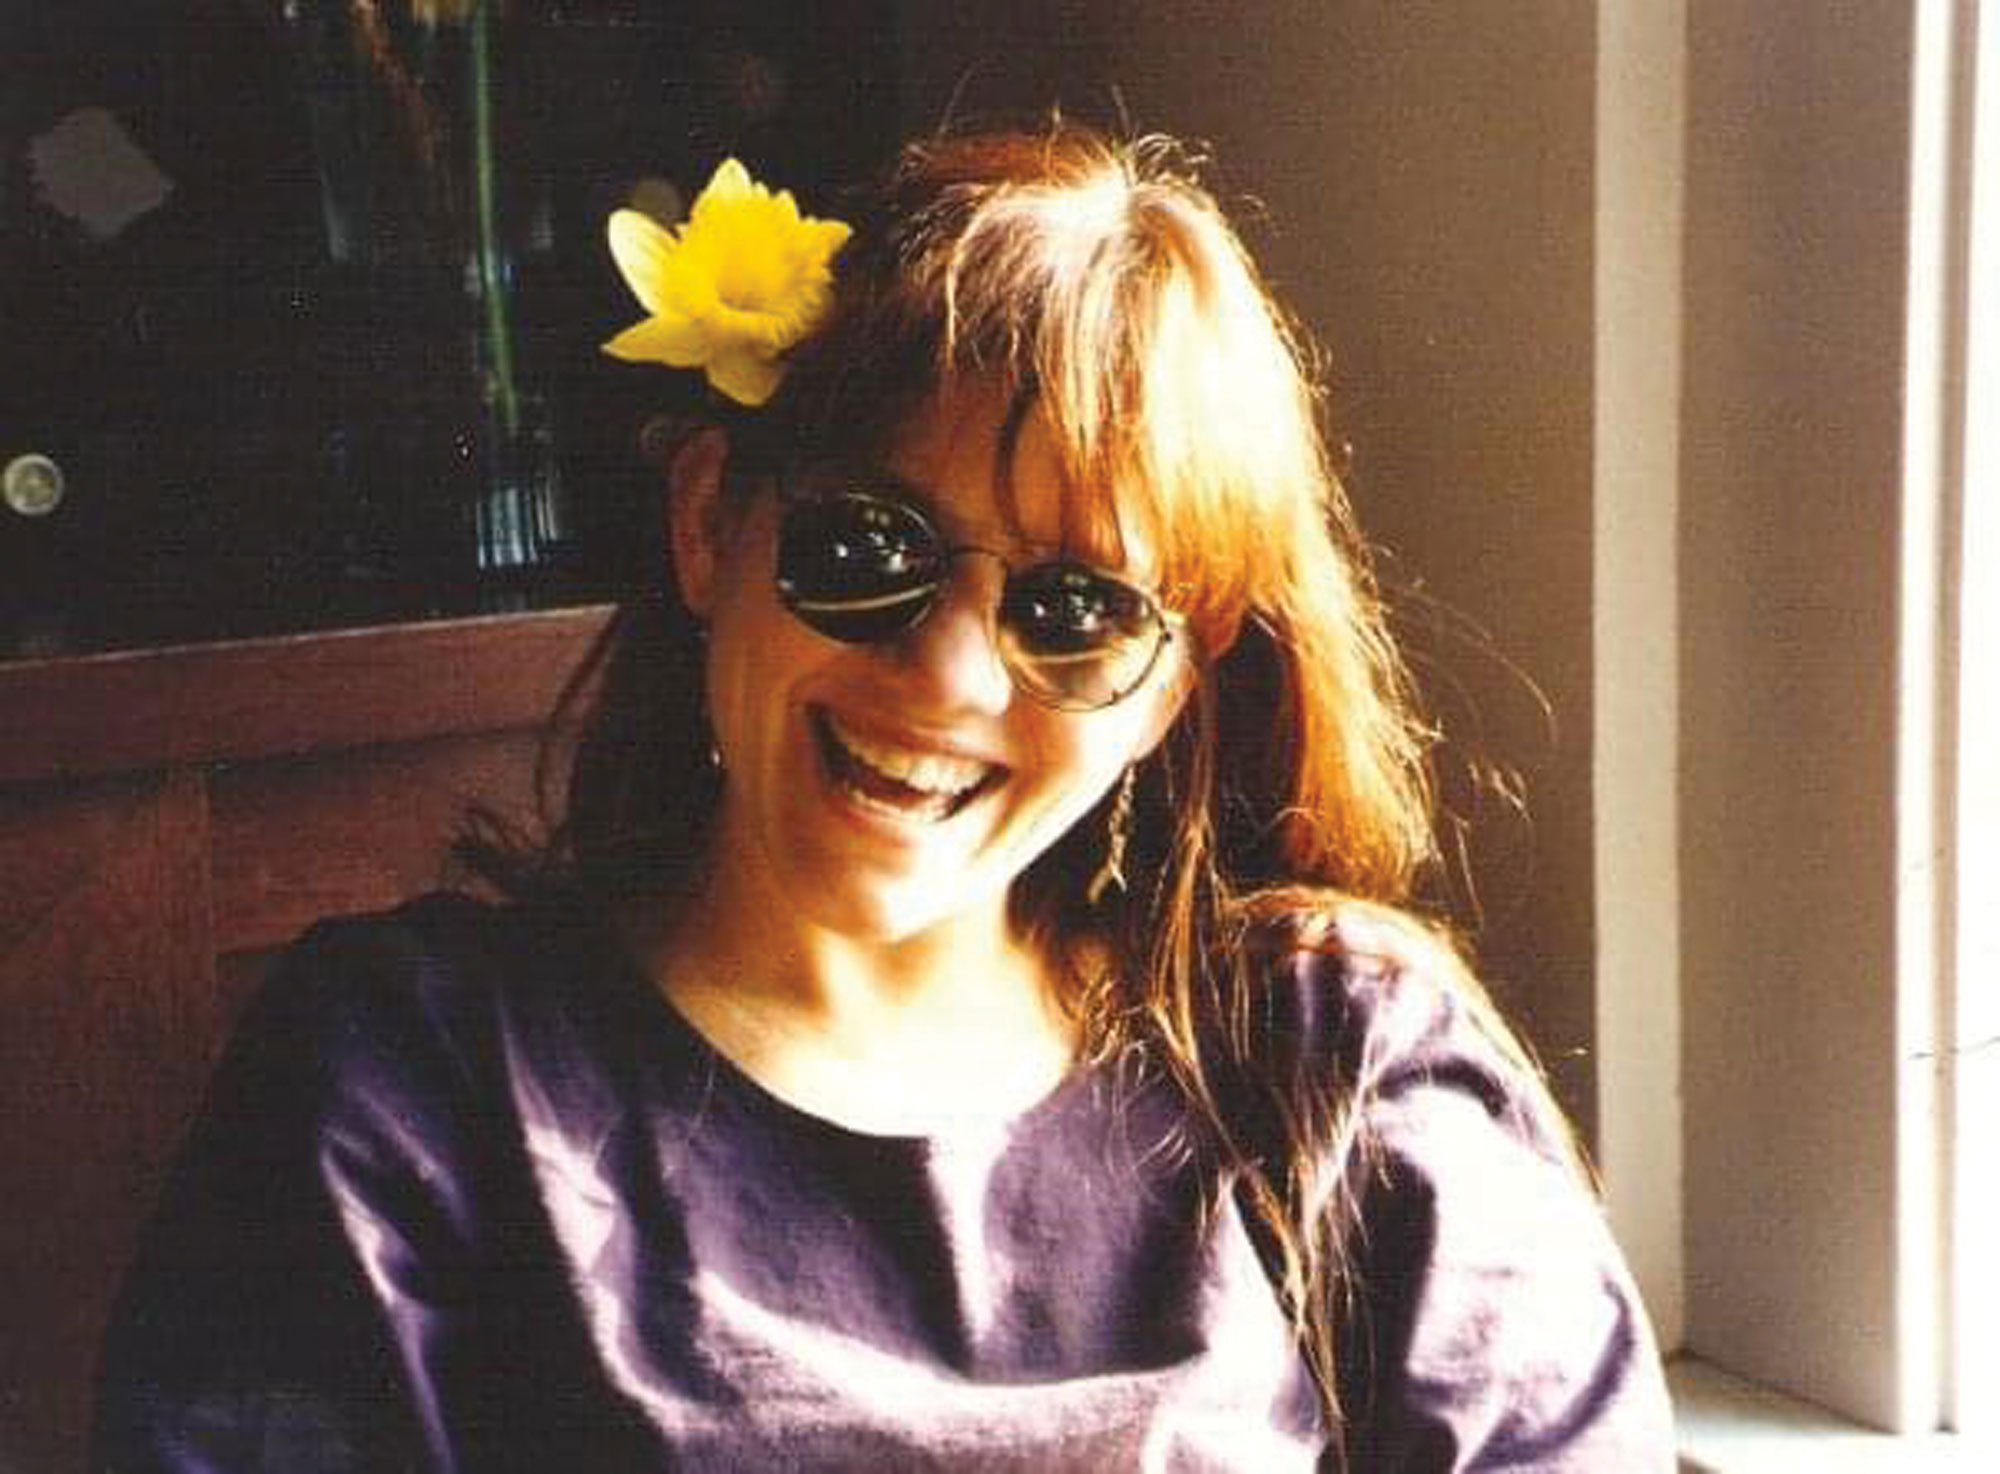 A woman smiling, wearing sunglasses and a yellow flower behind her right ear.